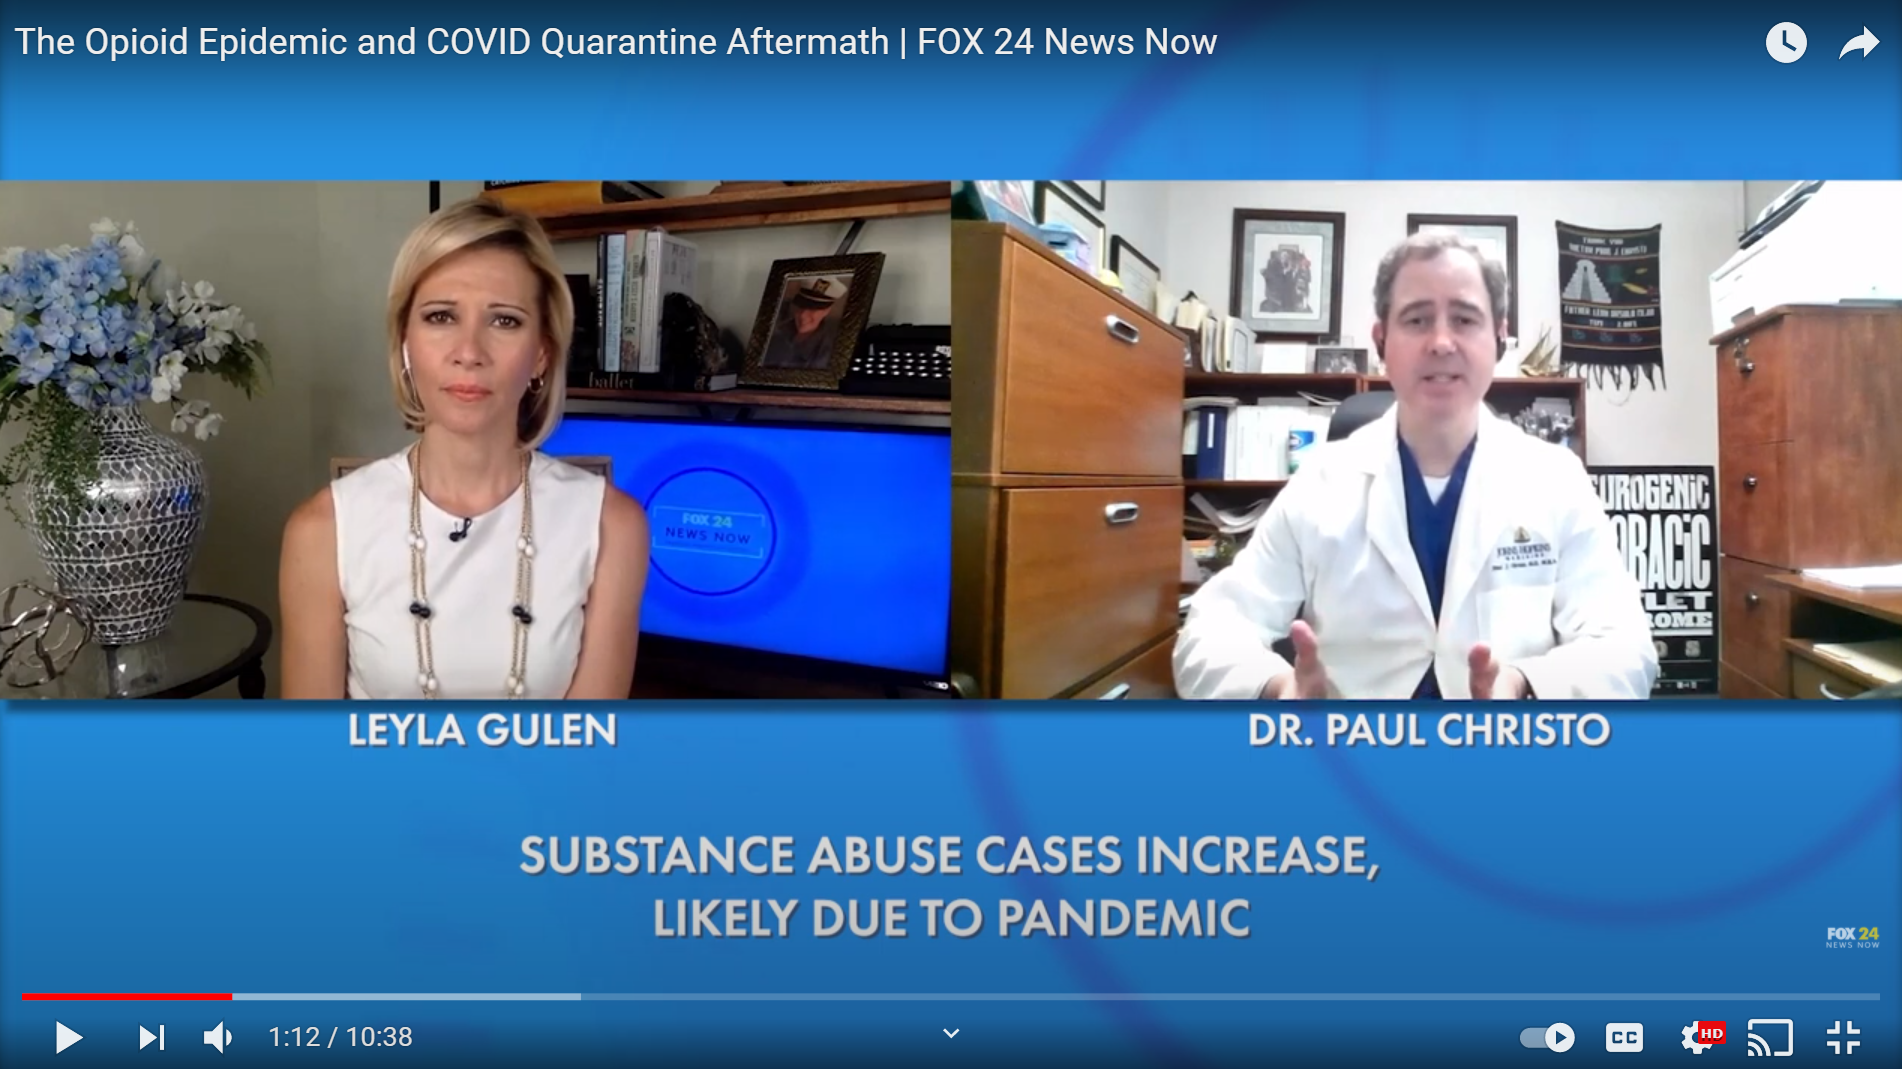 Dr. Christo on FOX 24 News Now: The Opioid Epidemic and COVID